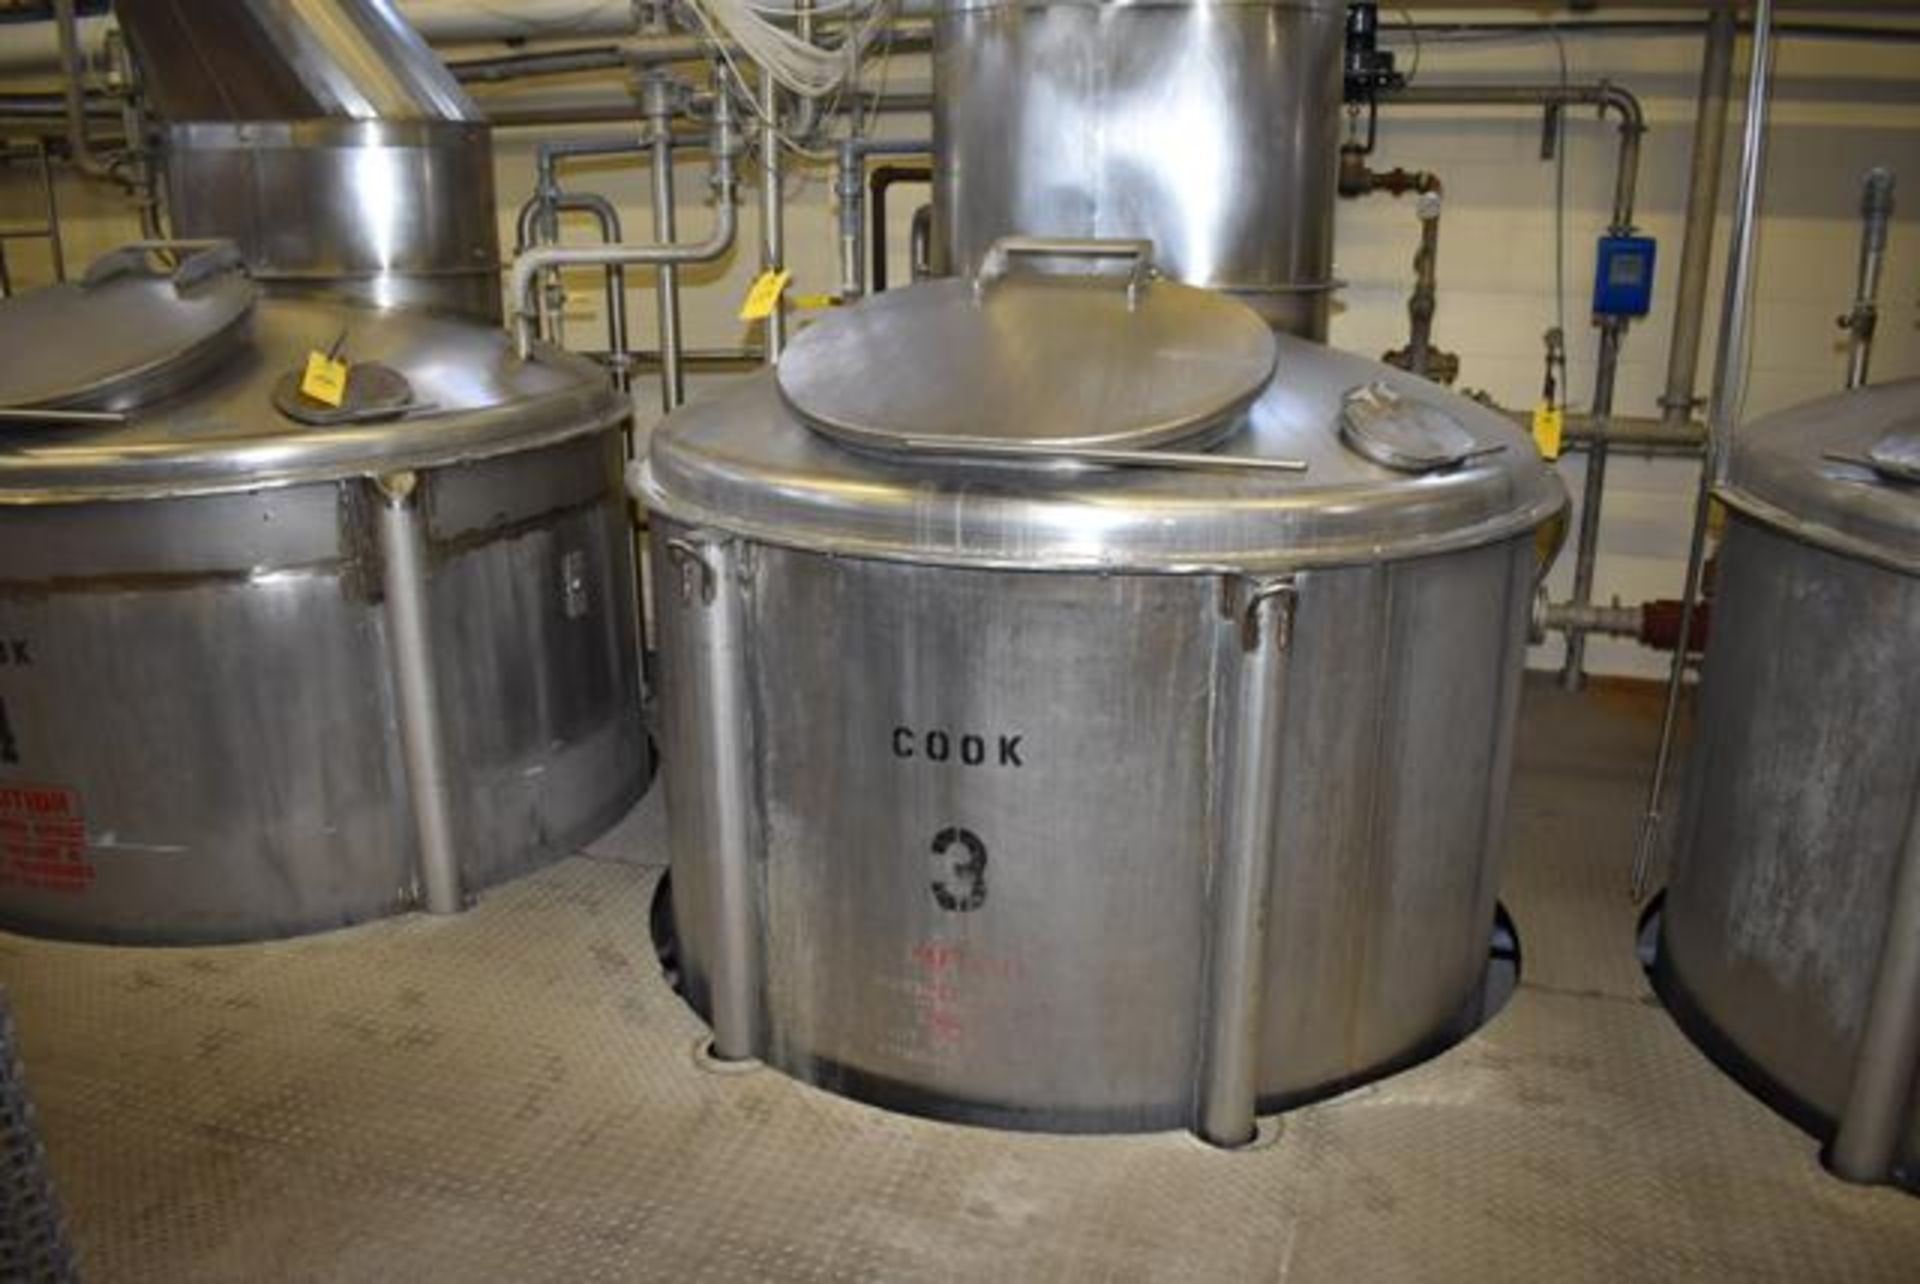 Krens – 1200 Gallon Capacity Stainless Steel Cook Tank, No Tag, Equipped with Copper Rotary Coil and